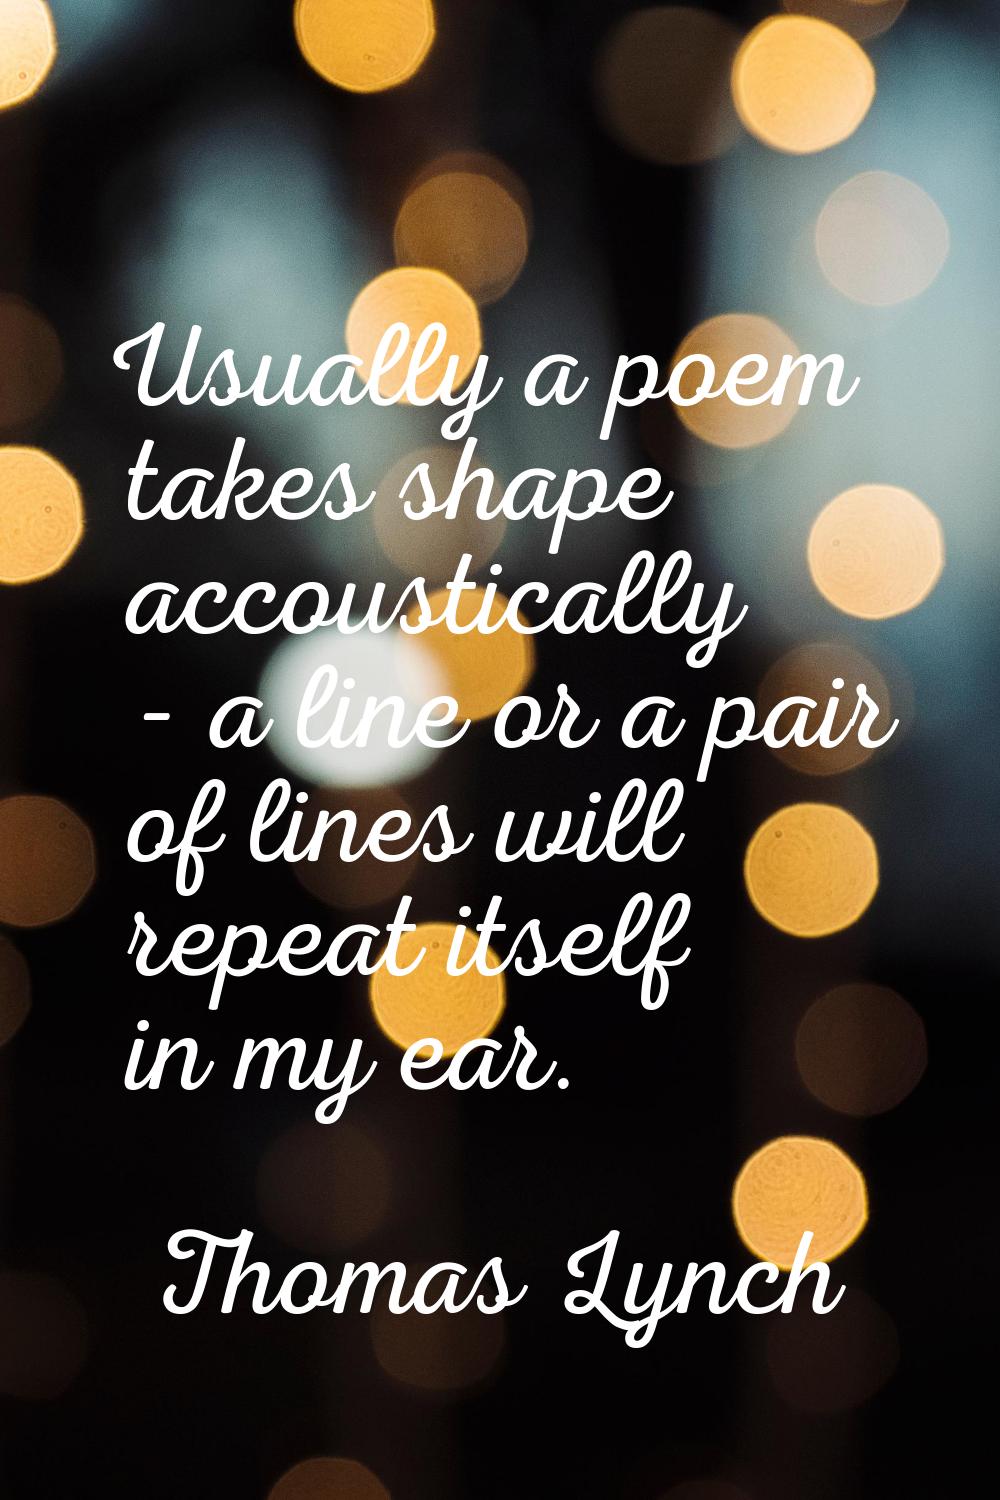 Usually a poem takes shape accoustically - a line or a pair of lines will repeat itself in my ear.